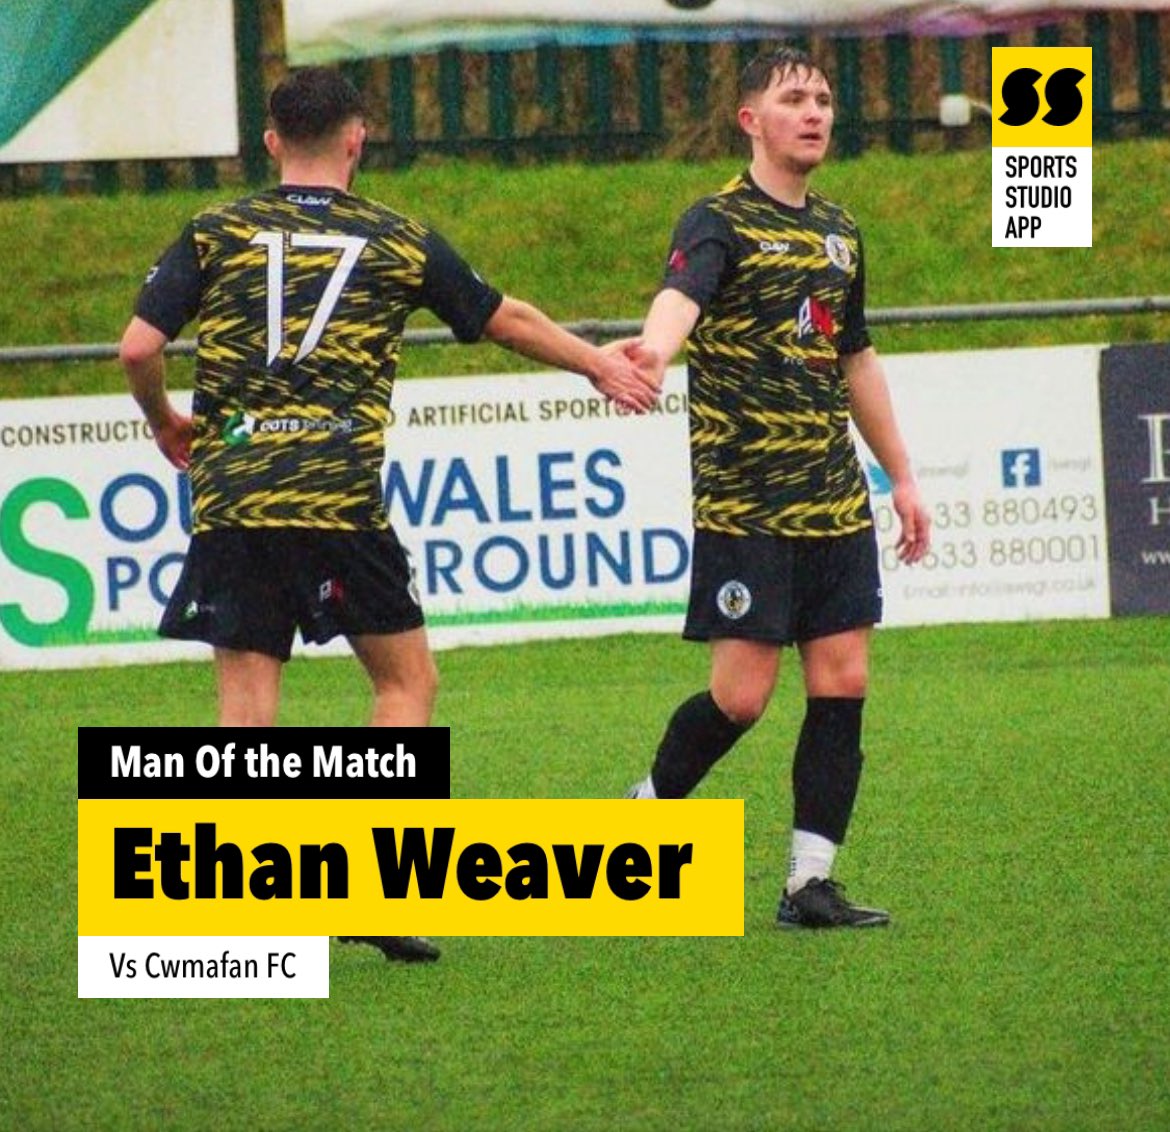 Cornelly United see off Cwmafan at Cots Arena to remain second. A win against FC Porthcawl Monday will secure runners up for the boys. 

Man Of The Match and a fine Hat - Trick From Ethan Weaver. 

We want to wish Cwmafan all the very best 🐝